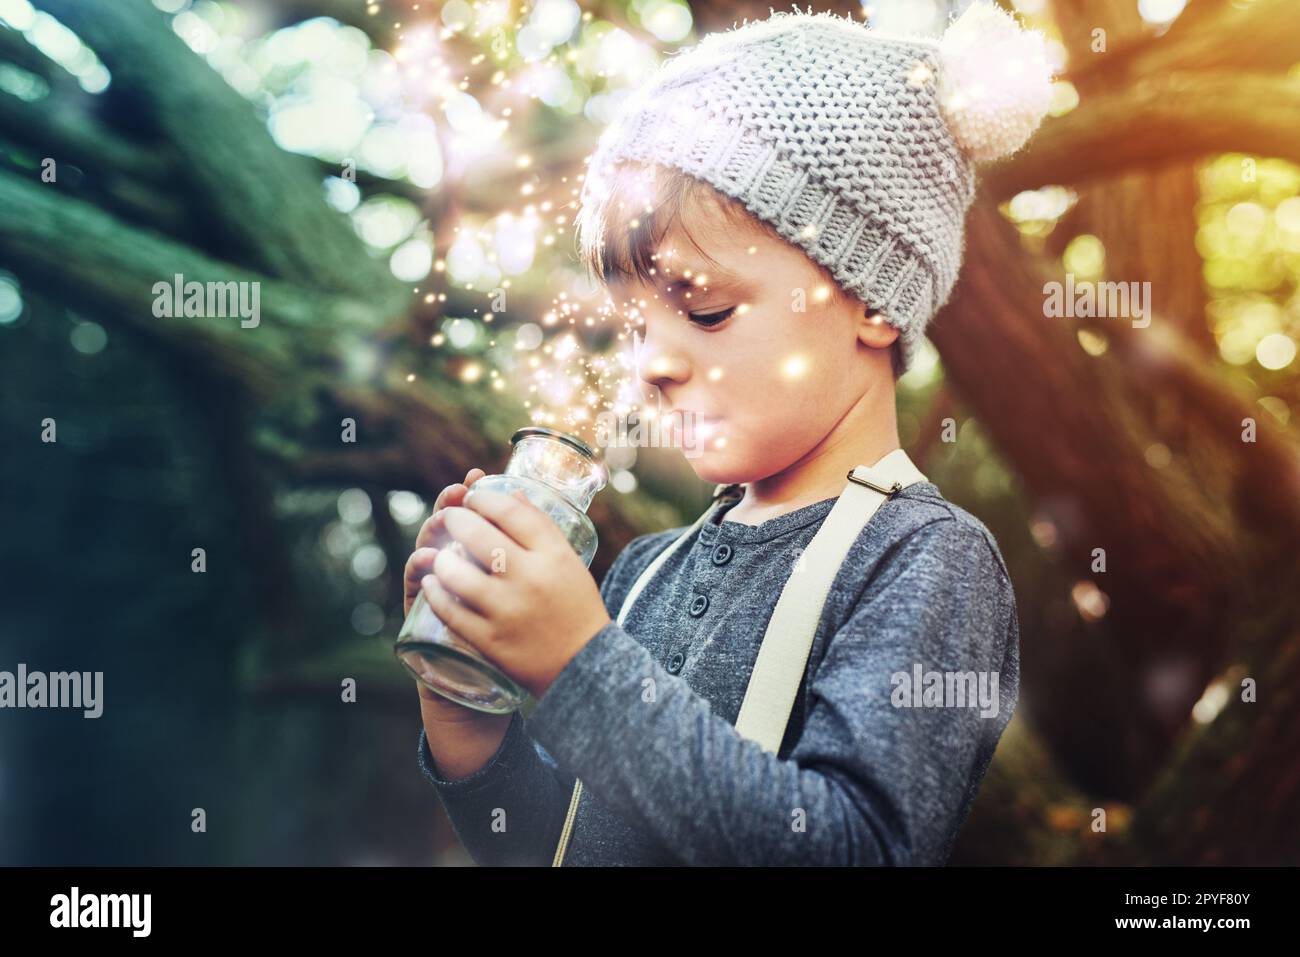 What magic is this. a little boy catching fireflies in a jar outside. Stock Photo